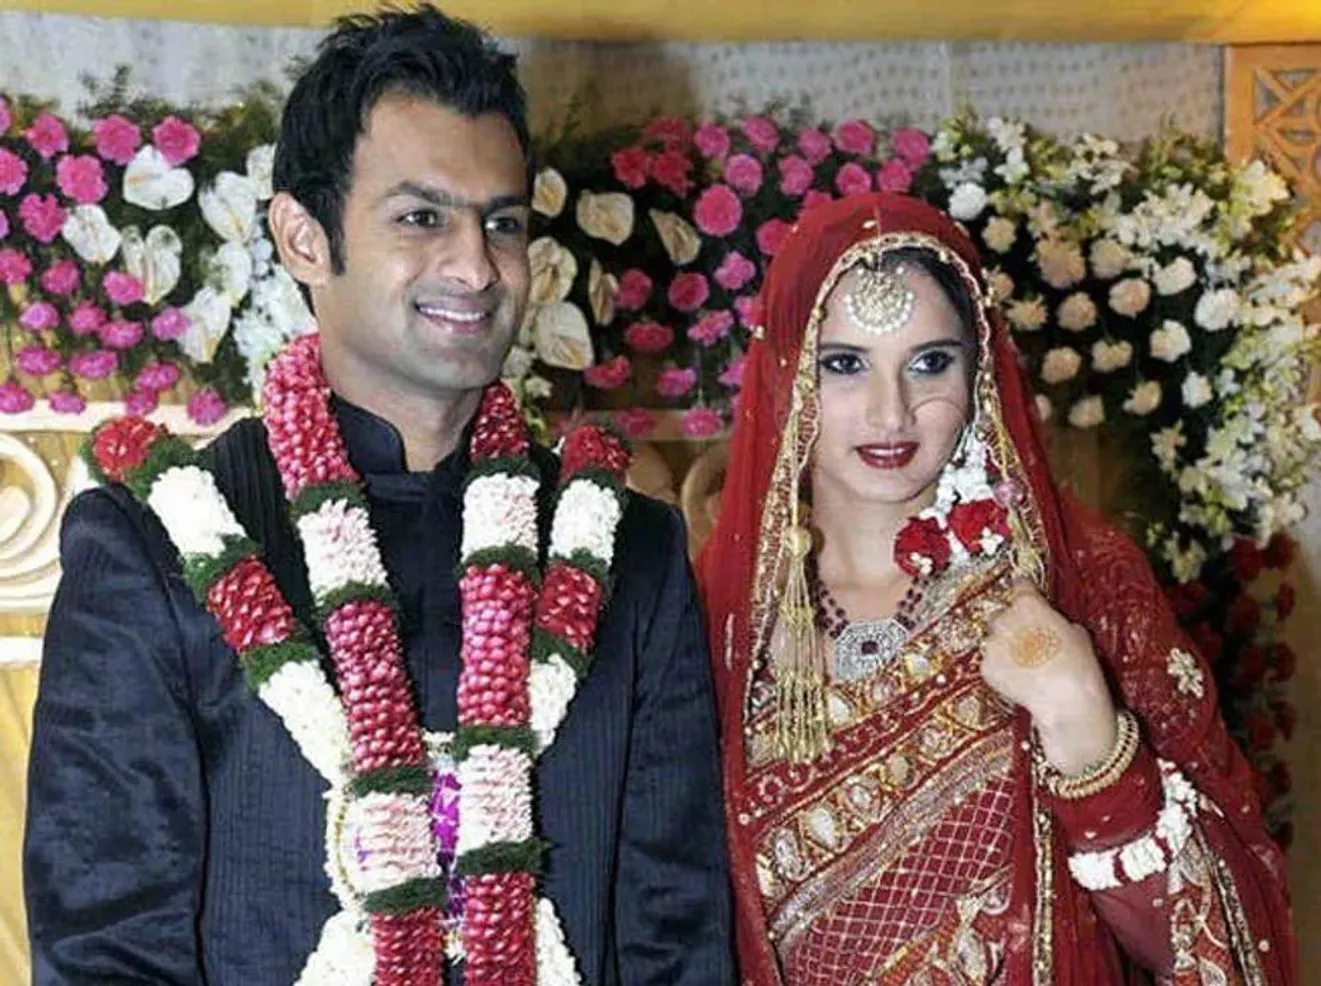 Shoaib and Sania got married in 2010